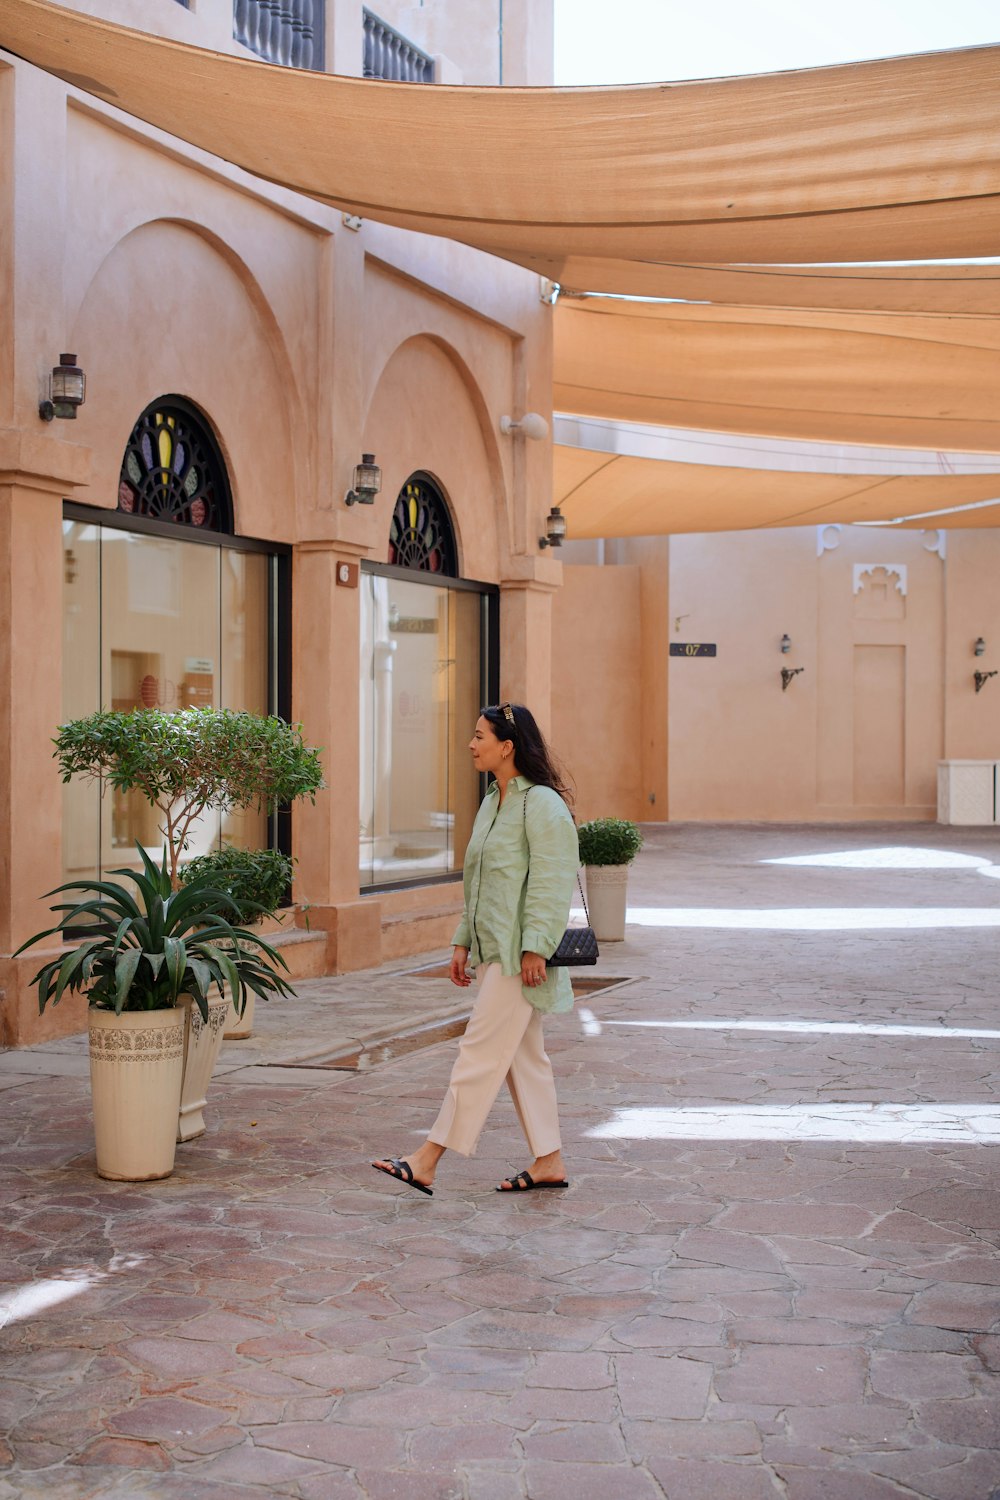 a woman walking down a street past a building